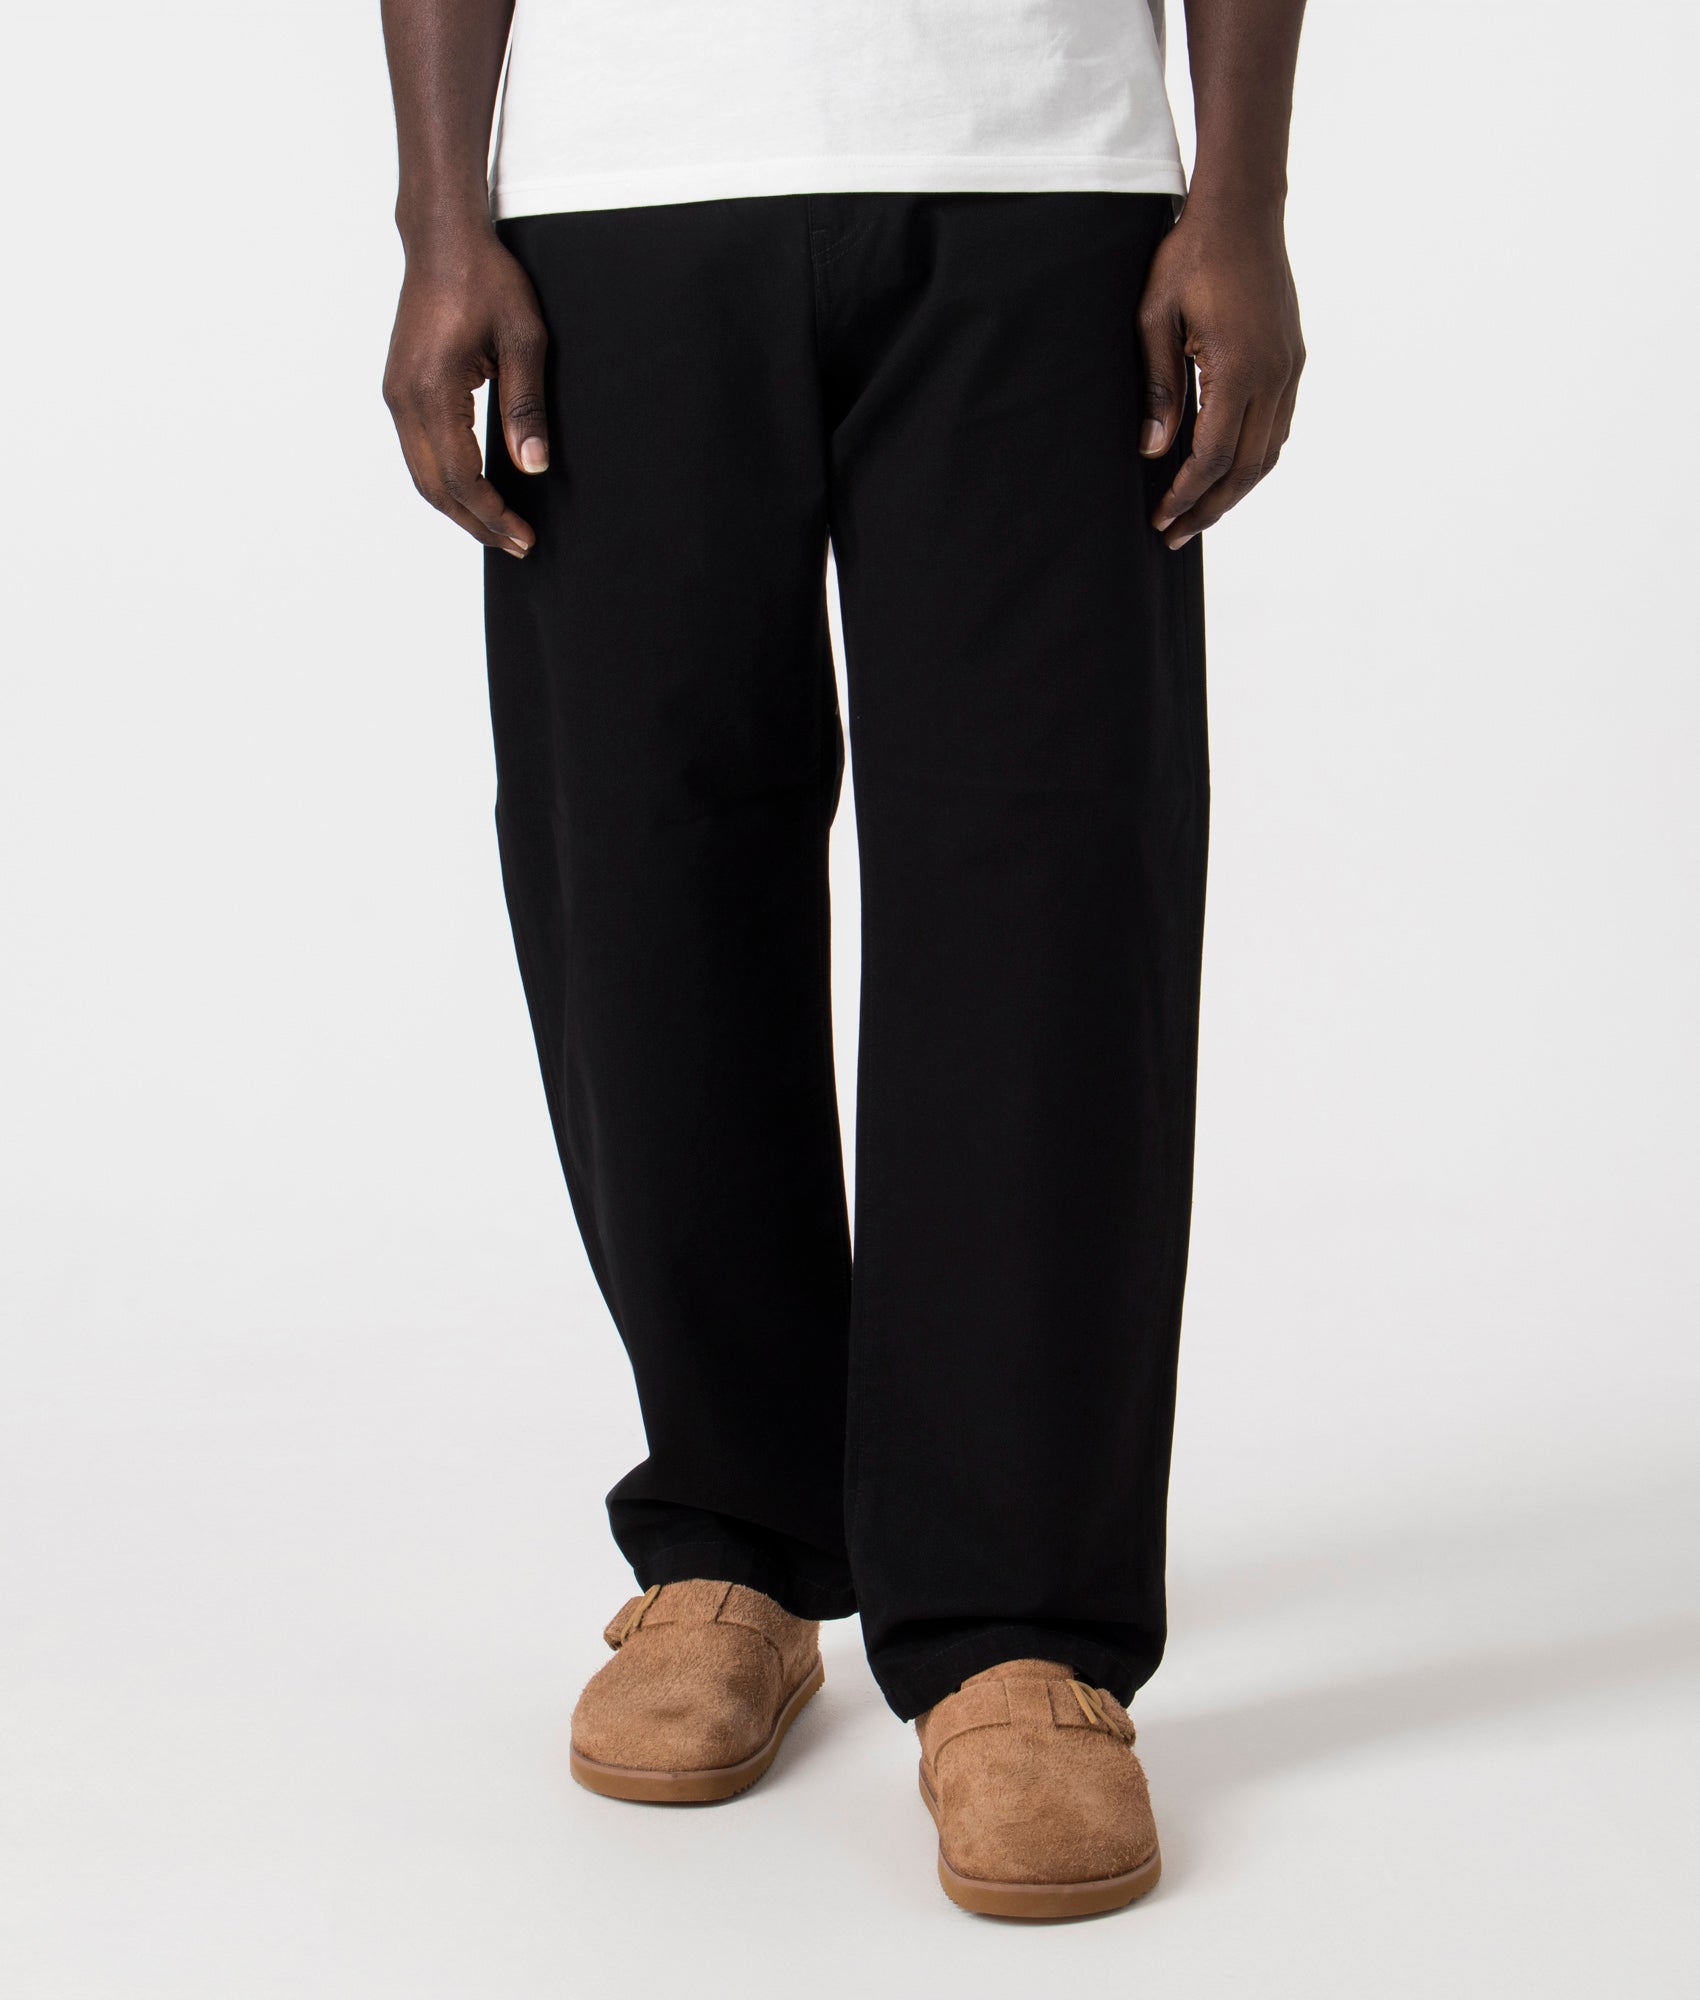 Carhartt WIP Mens Relaxed Fit Landon Pants - Colour: 8902 Black - Size: 32W